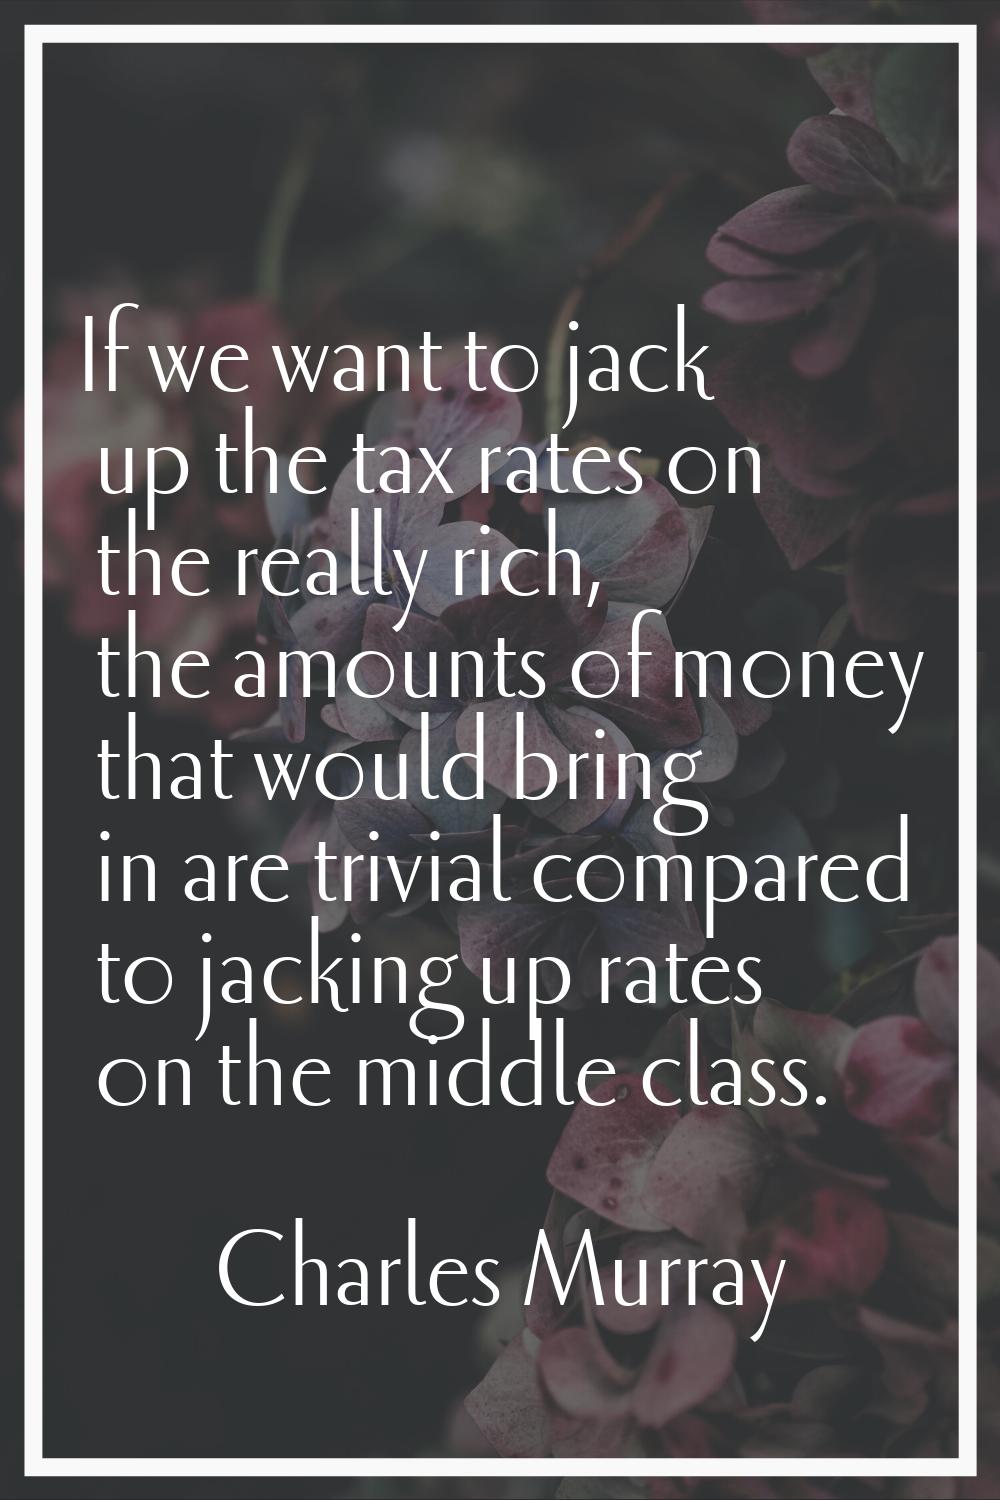 If we want to jack up the tax rates on the really rich, the amounts of money that would bring in ar